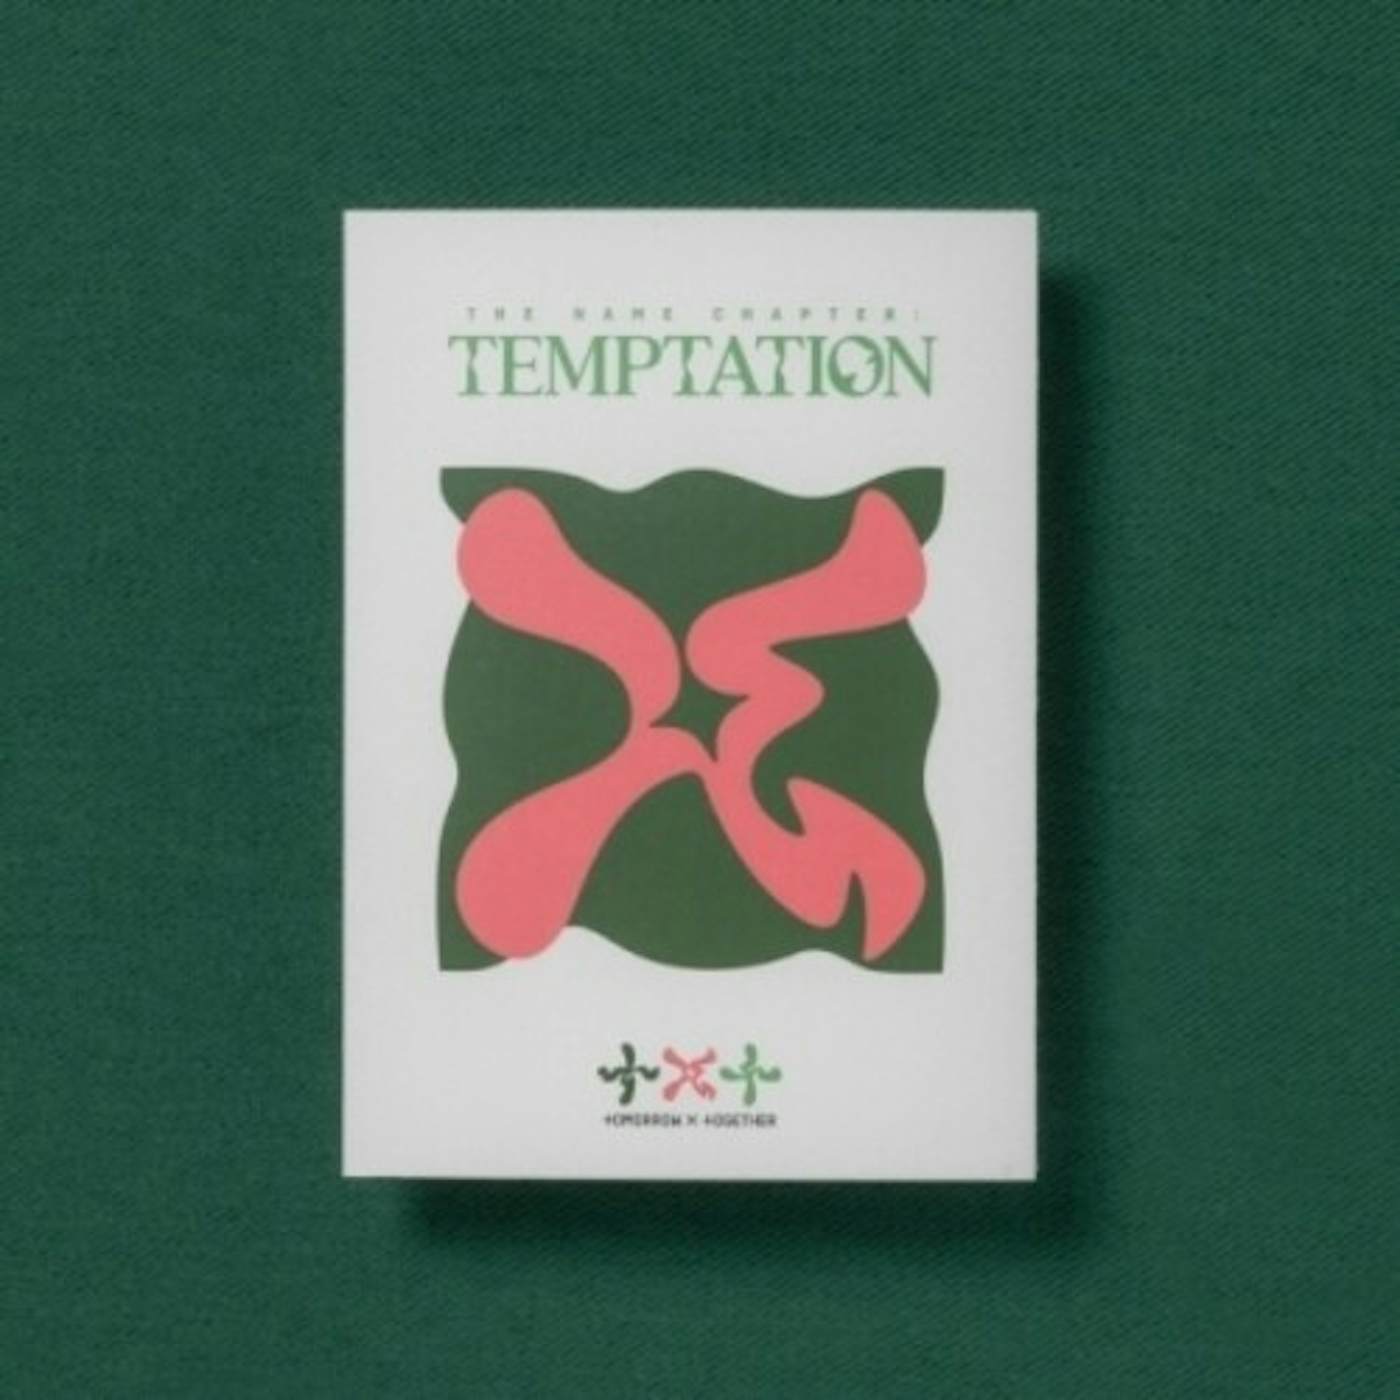 TOMORROW X TOGETHER TEMPTATION - LULLABY VERSION CD